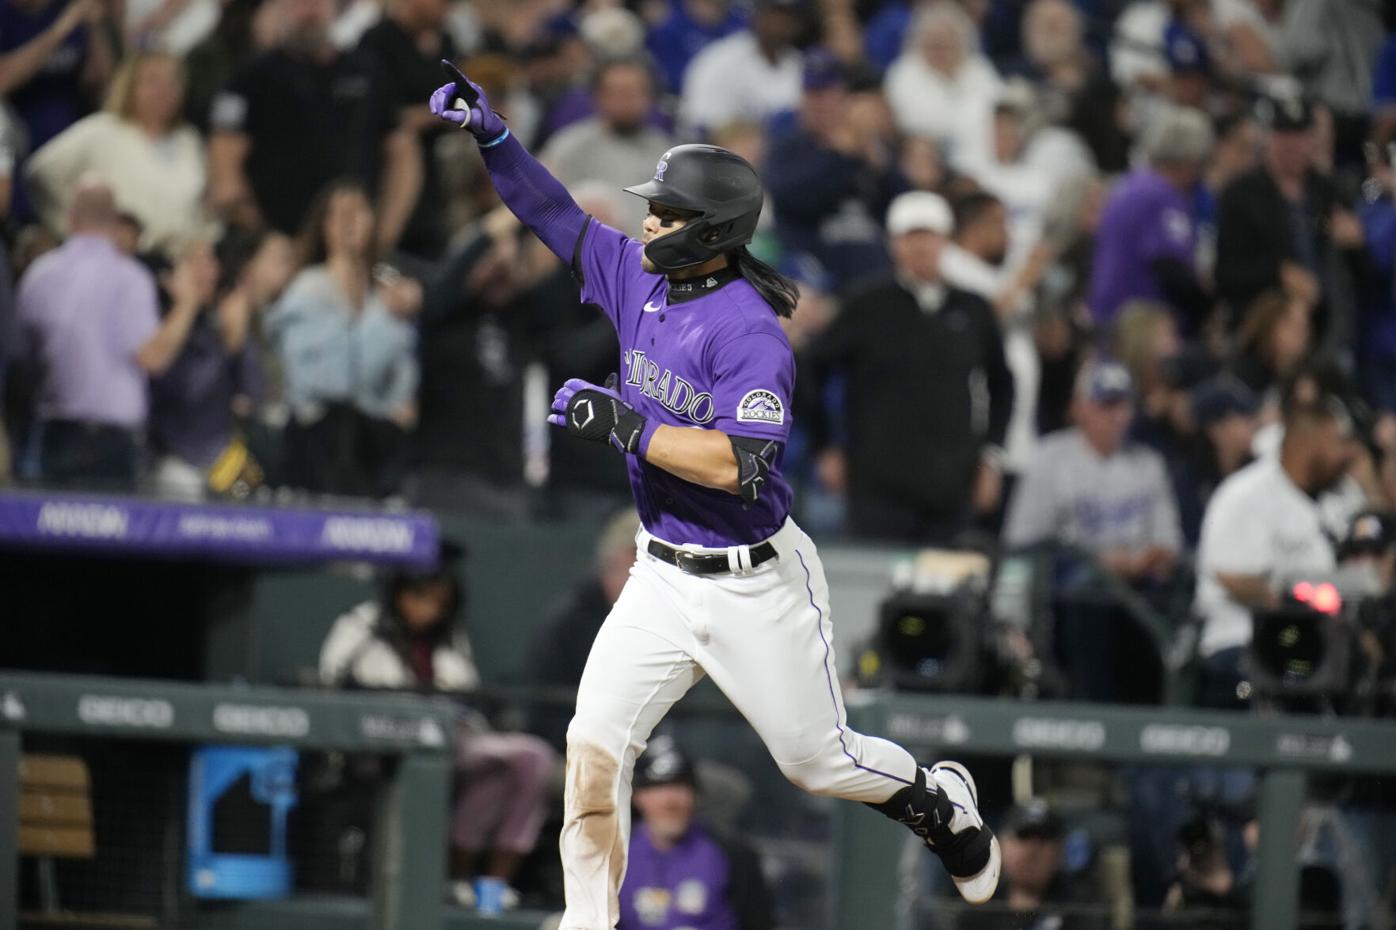 Bryant gets his first RBIs for Rockies in 4-1 win at Texas